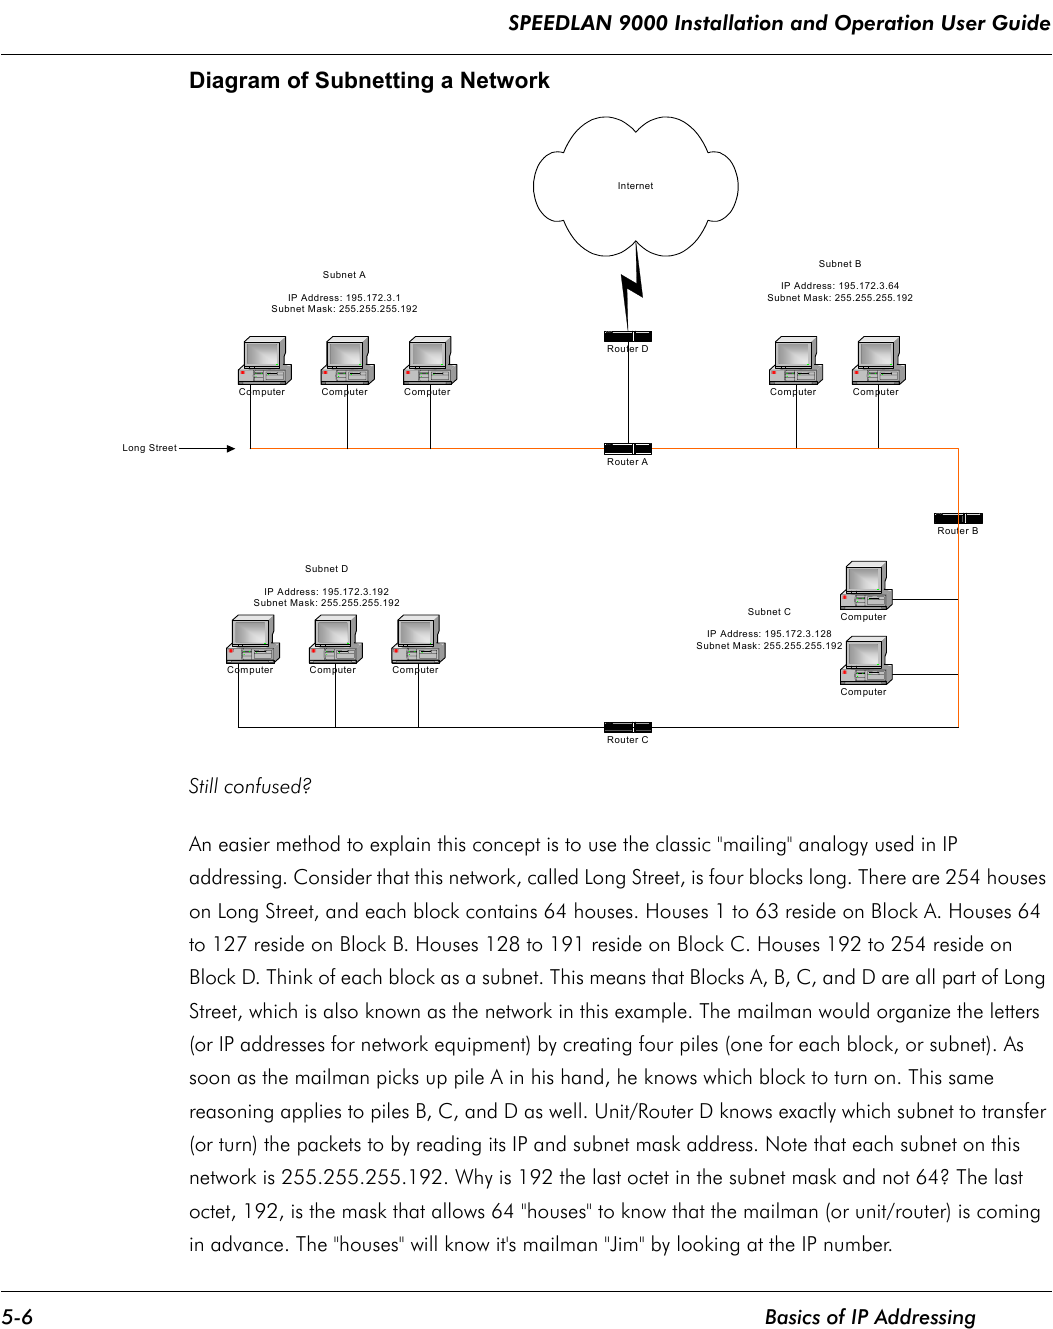 SPEEDLAN 9000 Installation and Operation User Guide 5-6 Basics of IP AddressingDiagram of Subnetting a NetworkStill confused? An easier method to explain this concept is to use the classic &quot;mailing&quot; analogy used in IP addressing. Consider that this network, called Long Street, is four blocks long. There are 254 houses on Long Street, and each block contains 64 houses. Houses 1 to 63 reside on Block A. Houses 64 to 127 reside on Block B. Houses 128 to 191 reside on Block C. Houses 192 to 254 reside on Block D. Think of each block as a subnet. This means that Blocks A, B, C, and D are all part of Long Street, which is also known as the network in this example. The mailman would organize the letters (or IP addresses for network equipment) by creating four piles (one for each block, or subnet). As soon as the mailman picks up pile A in his hand, he knows which block to turn on. This same reasoning applies to piles B, C, and D as well. Unit/Router D knows exactly which subnet to transfer (or turn) the packets to by reading its IP and subnet mask address. Note that each subnet on this network is 255.255.255.192. Why is 192 the last octet in the subnet mask and not 64? The last octet, 192, is the mask that allows 64 &quot;houses&quot; to know that the mailman (or unit/router) is coming in advance. The &quot;houses&quot; will know it&apos;s mailman &quot;Jim&quot; by looking at the IP number. InternetRouter DRouter BRouter CComputer ComputerComputerComputerComputer Computer ComputerComputer Computer ComputerLong StreetSubnet AIP Address: 195.172.3.1Subnet Mask: 255.255.255.192Subnet BIP Address: 195.172.3.64Subnet Mask: 255.255.255.192Subnet CIP Address: 195.172.3.128Subnet Mask: 255.255.255.192Subnet DIP Address: 195.172.3.192Subnet Mask: 255.255.255.192Router A